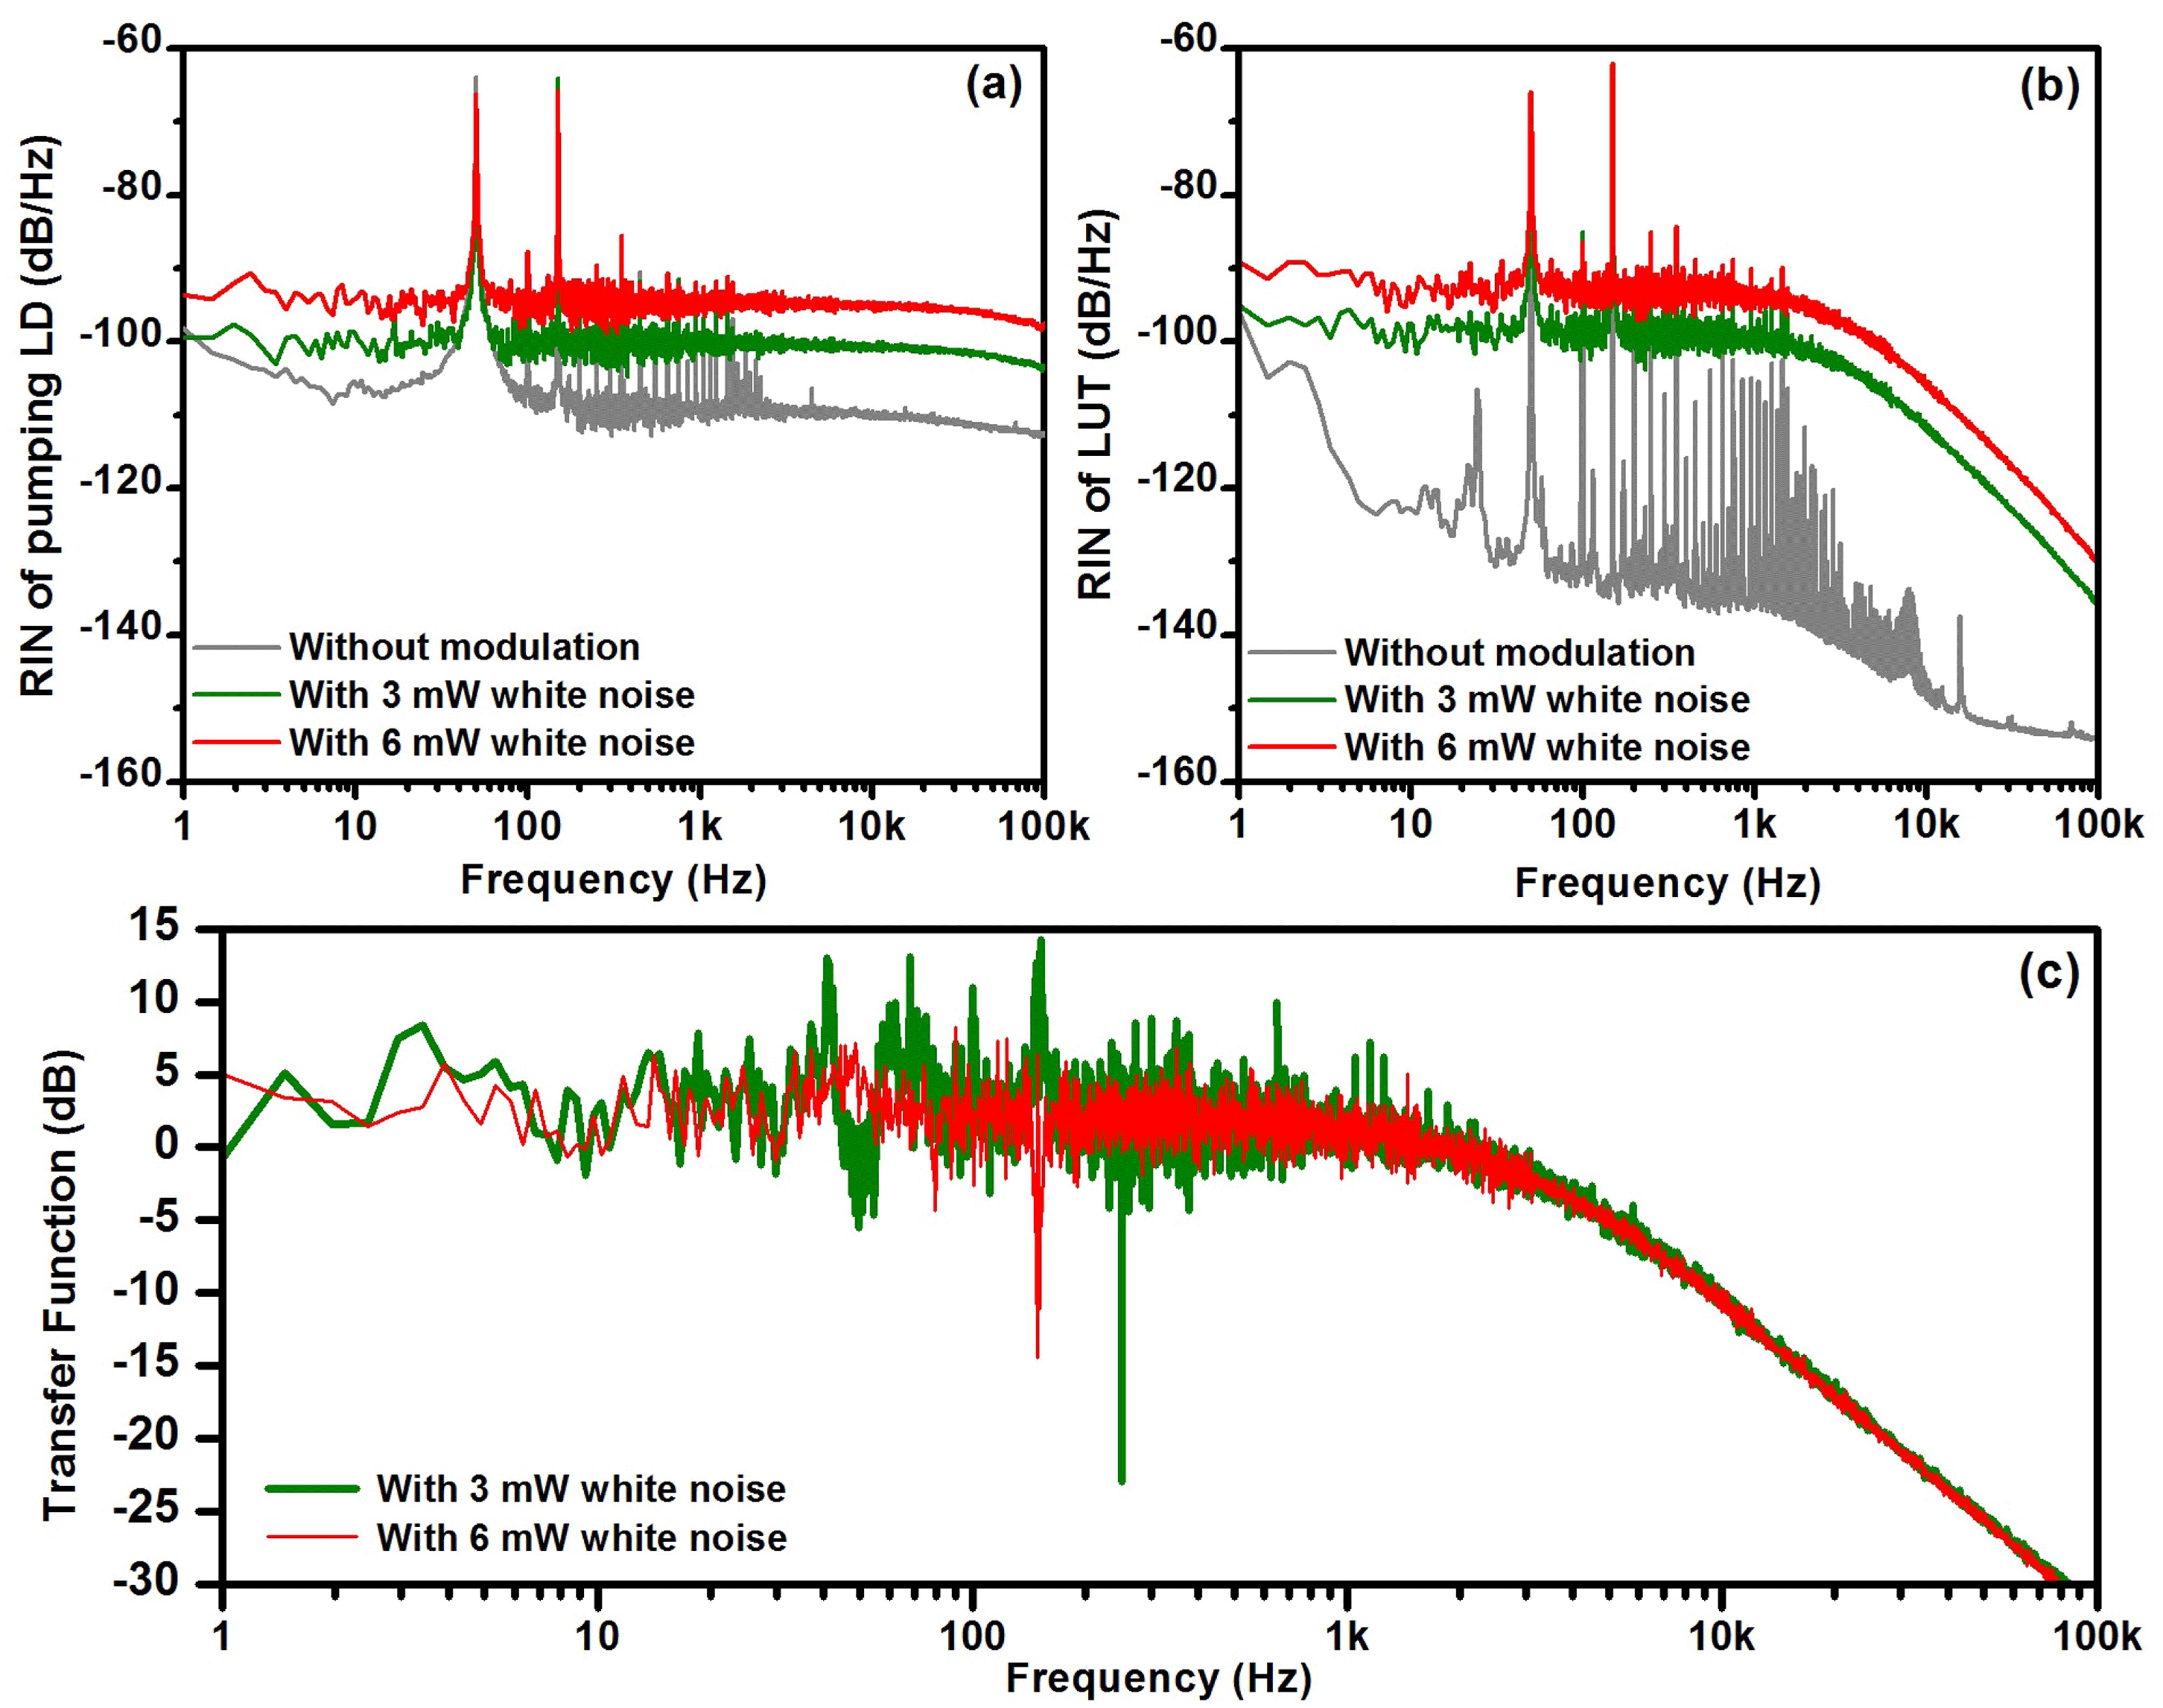 (a) RIN of the pump LD with (red and green) and without (gray) white noise modulation. (b) RIN of the LUT with (red and green) and without (gray) white noise modulation. (c) Transfer function of the RIN measured by applying 3 mW (green) and 6 mW (red) white noise modulation.